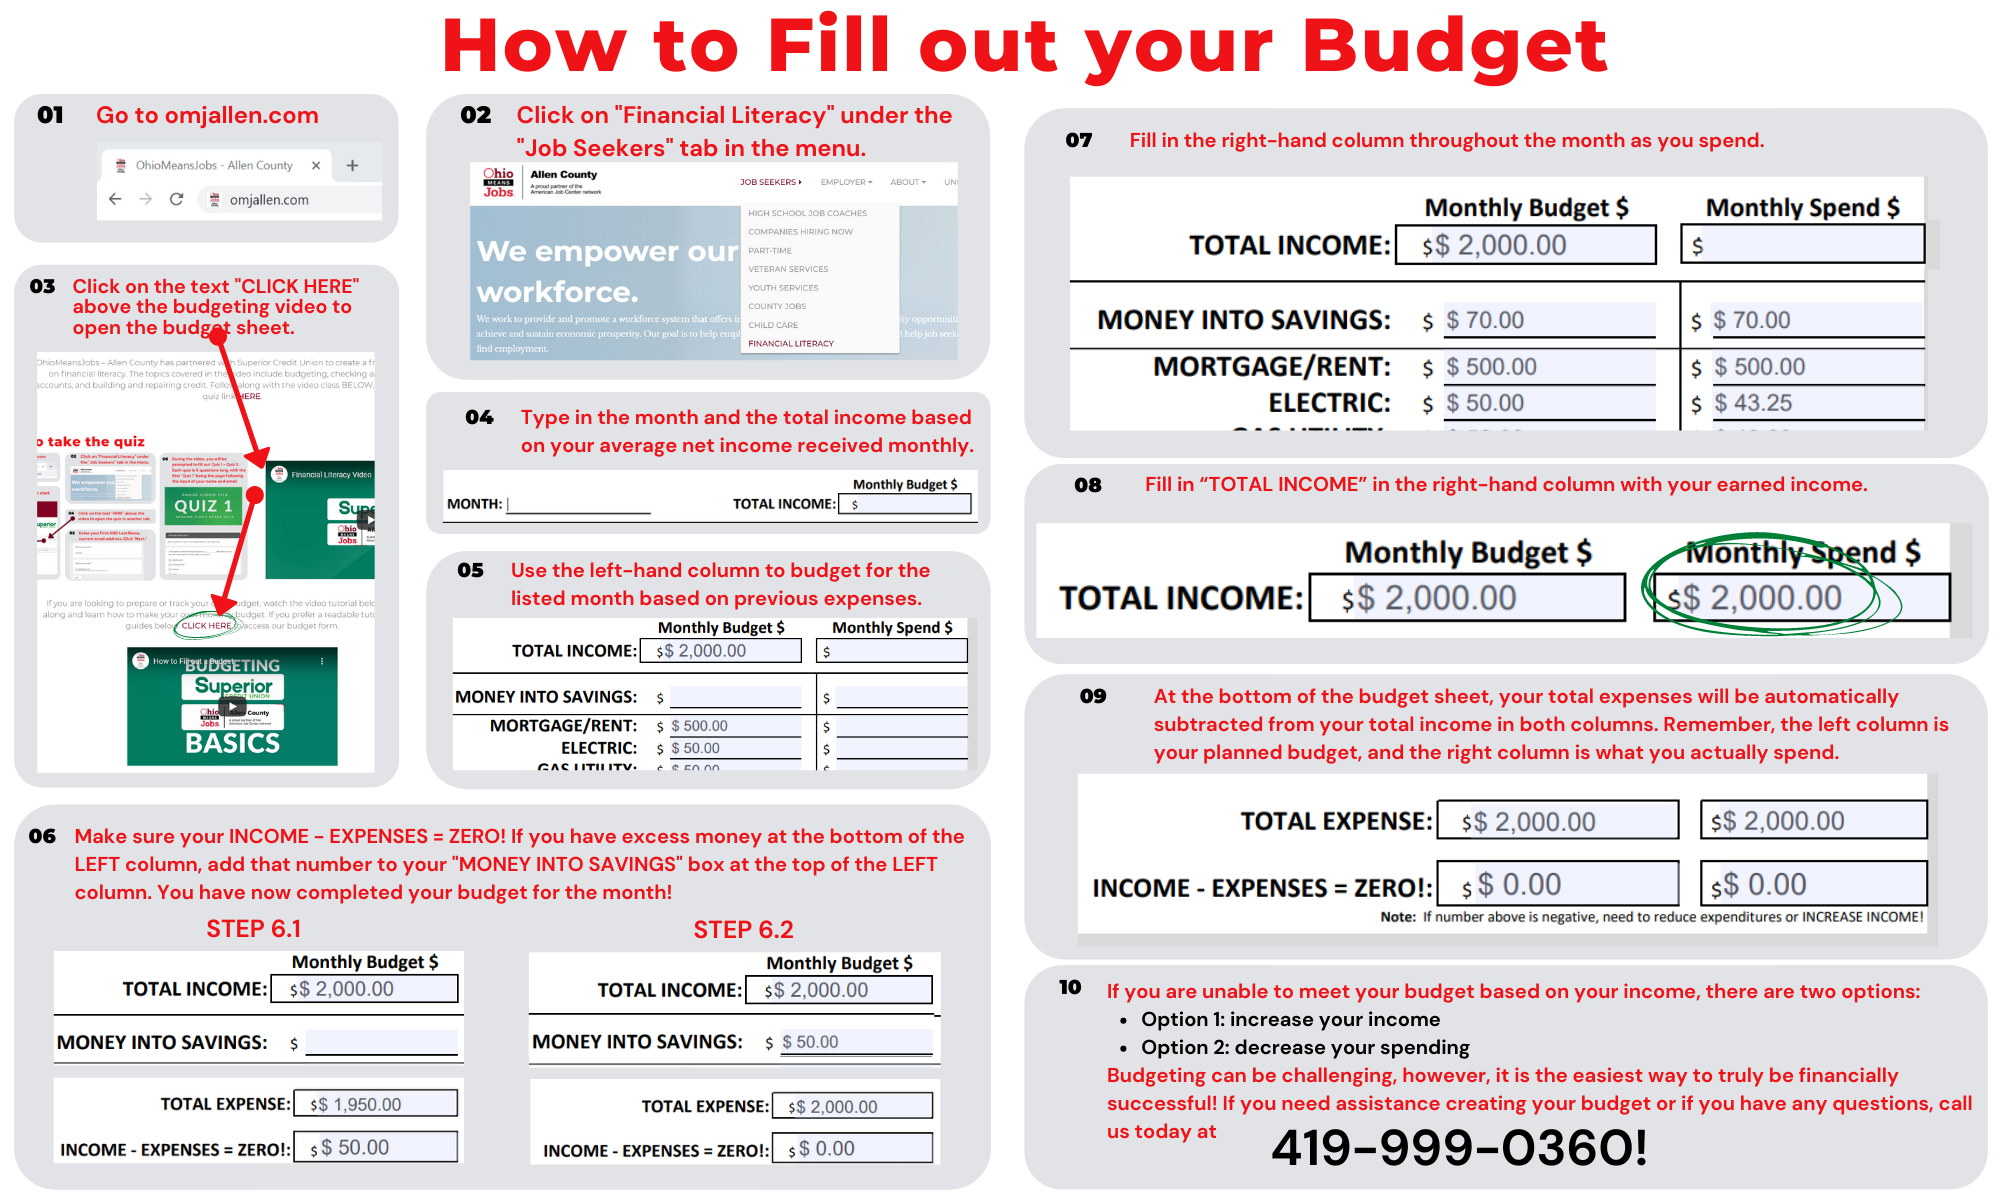 How to Fill Out Your Budget